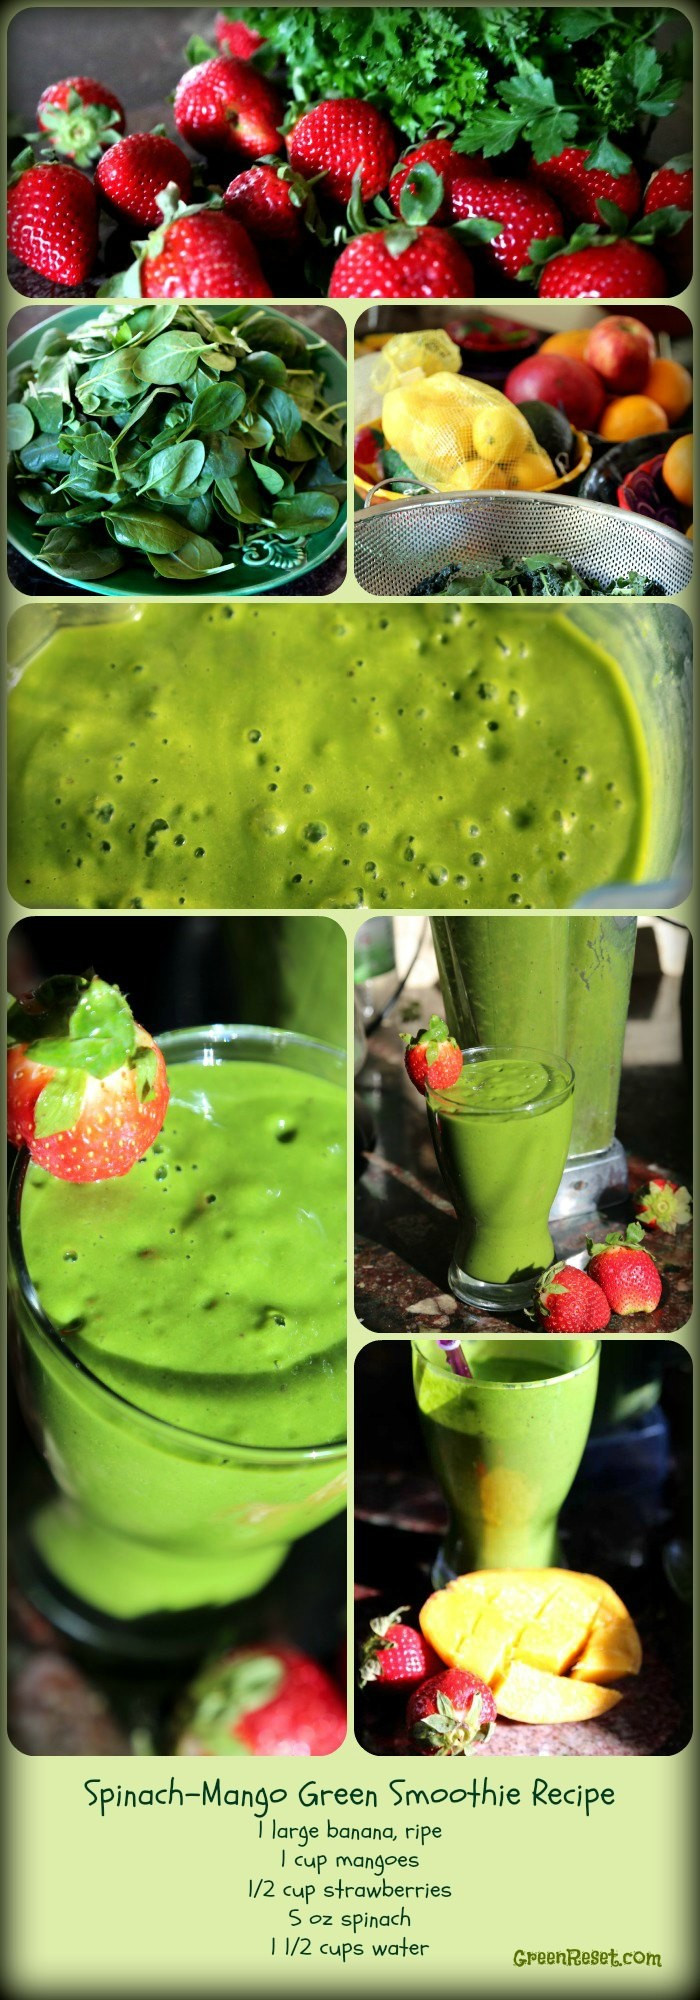 Healthy Fruit Smoothie Recipes
 9 Breakfast Smoothies Plus 3 More Super Healthy Breakfast